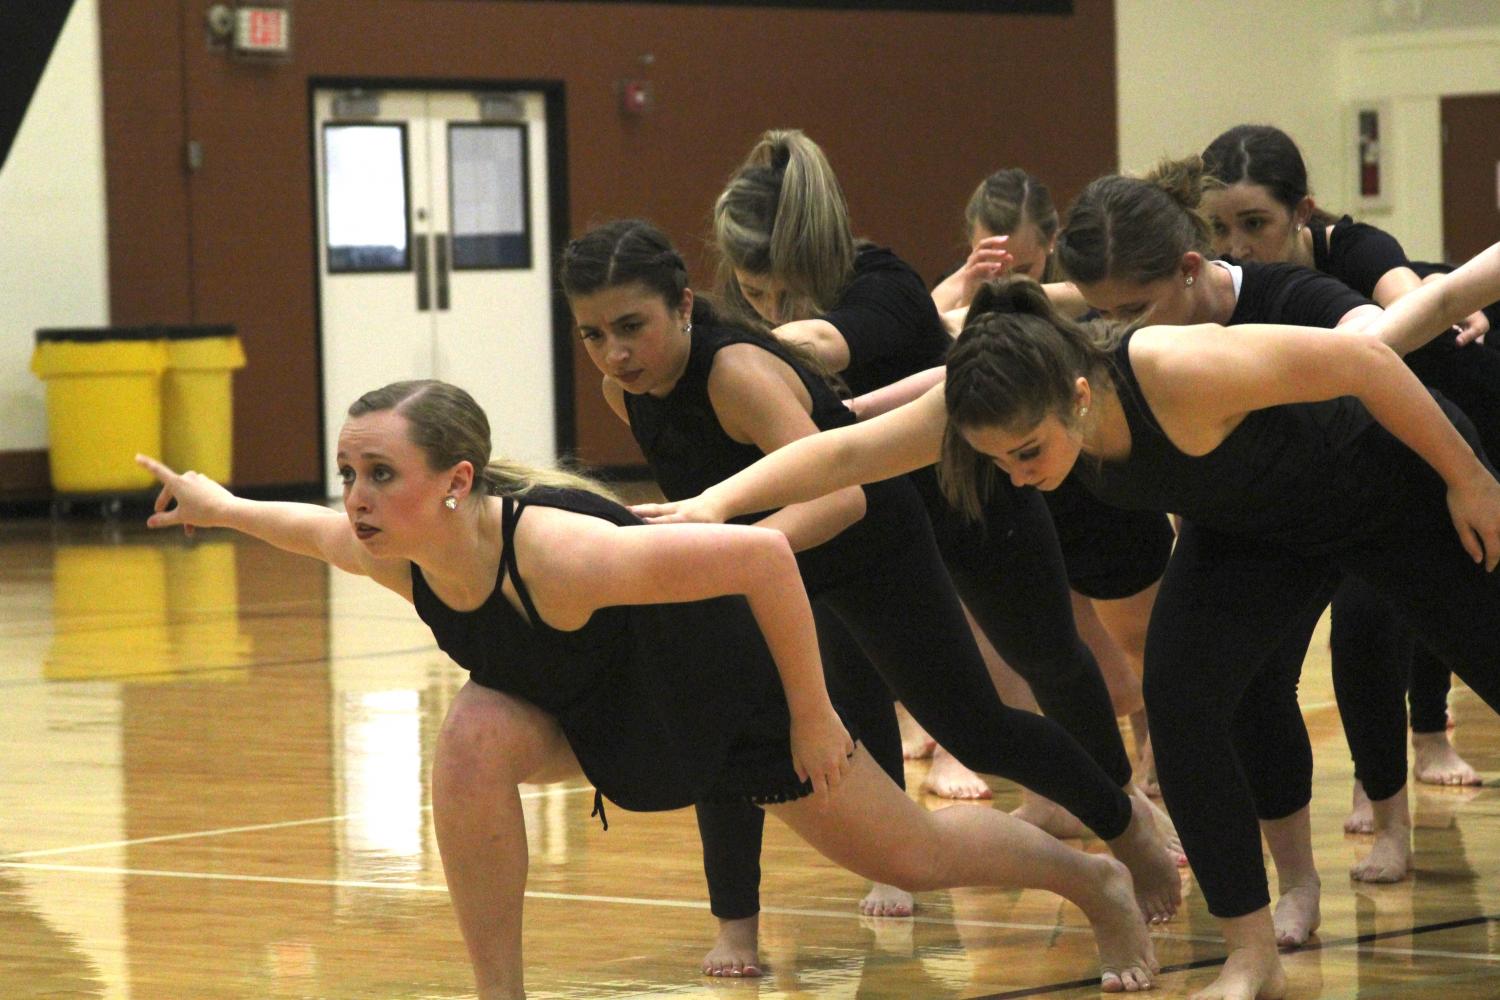 Tori Loper 17 leads a formation in a performance.